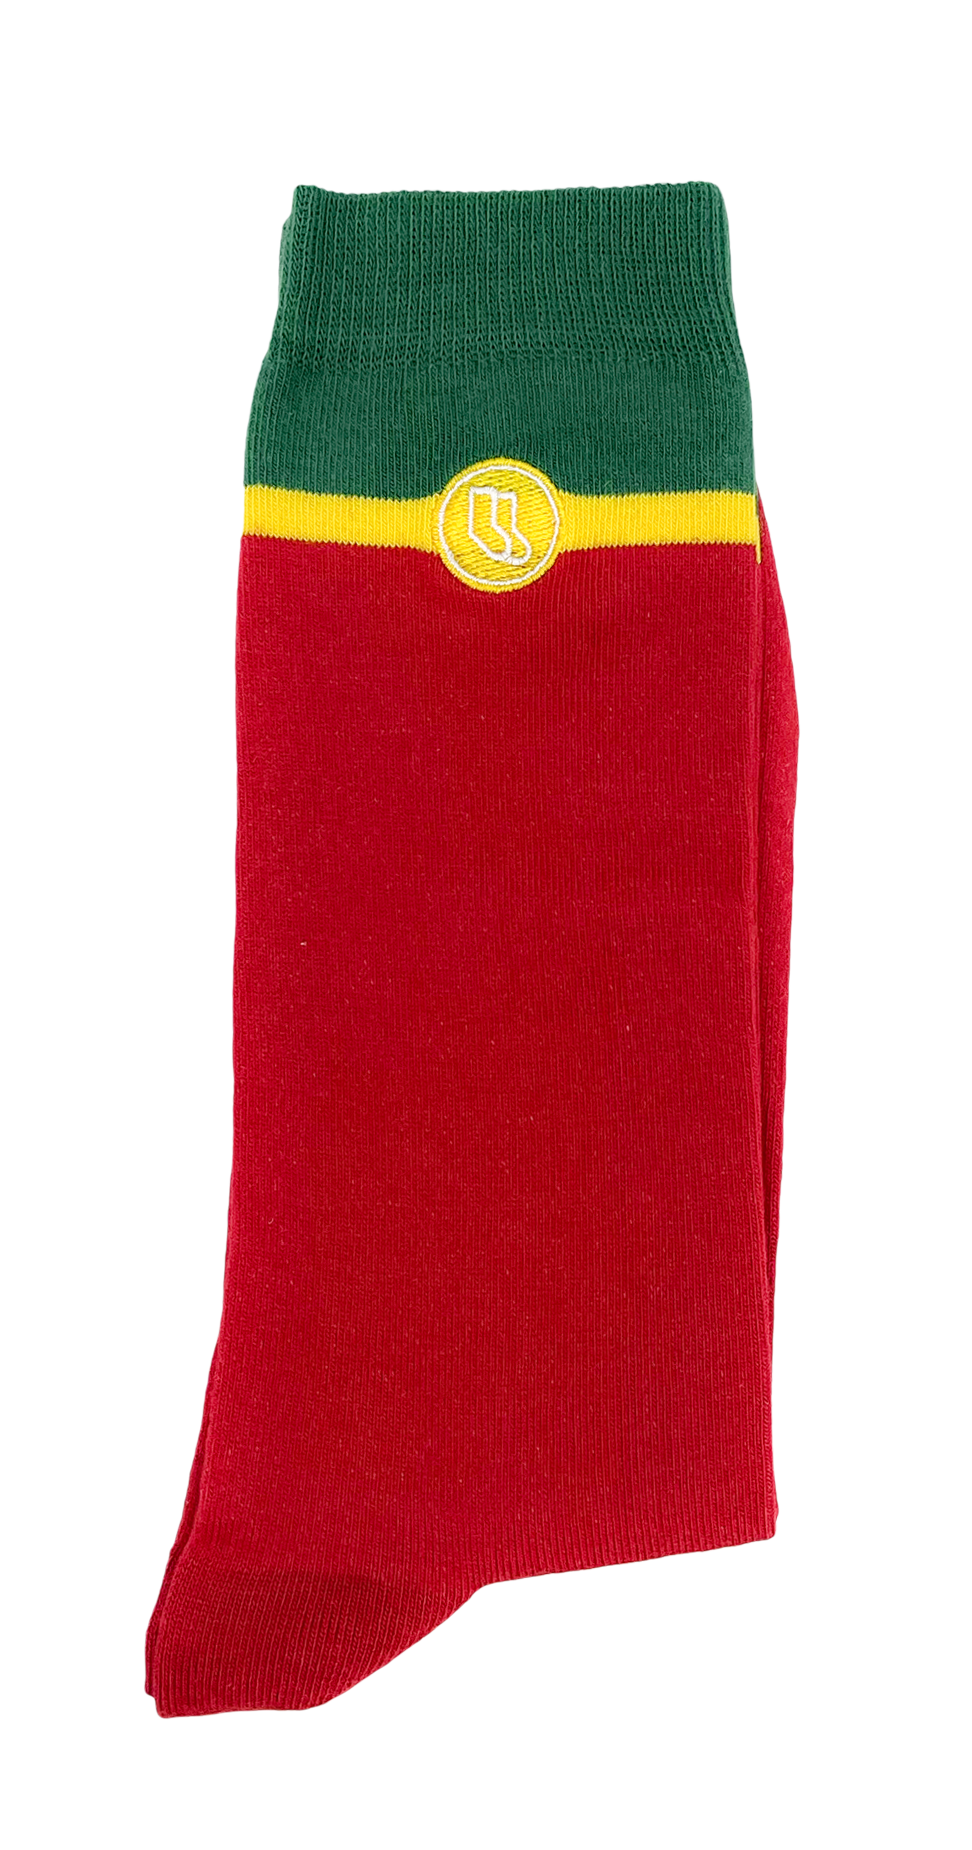 Socks in Portugal colours for Euro 2024